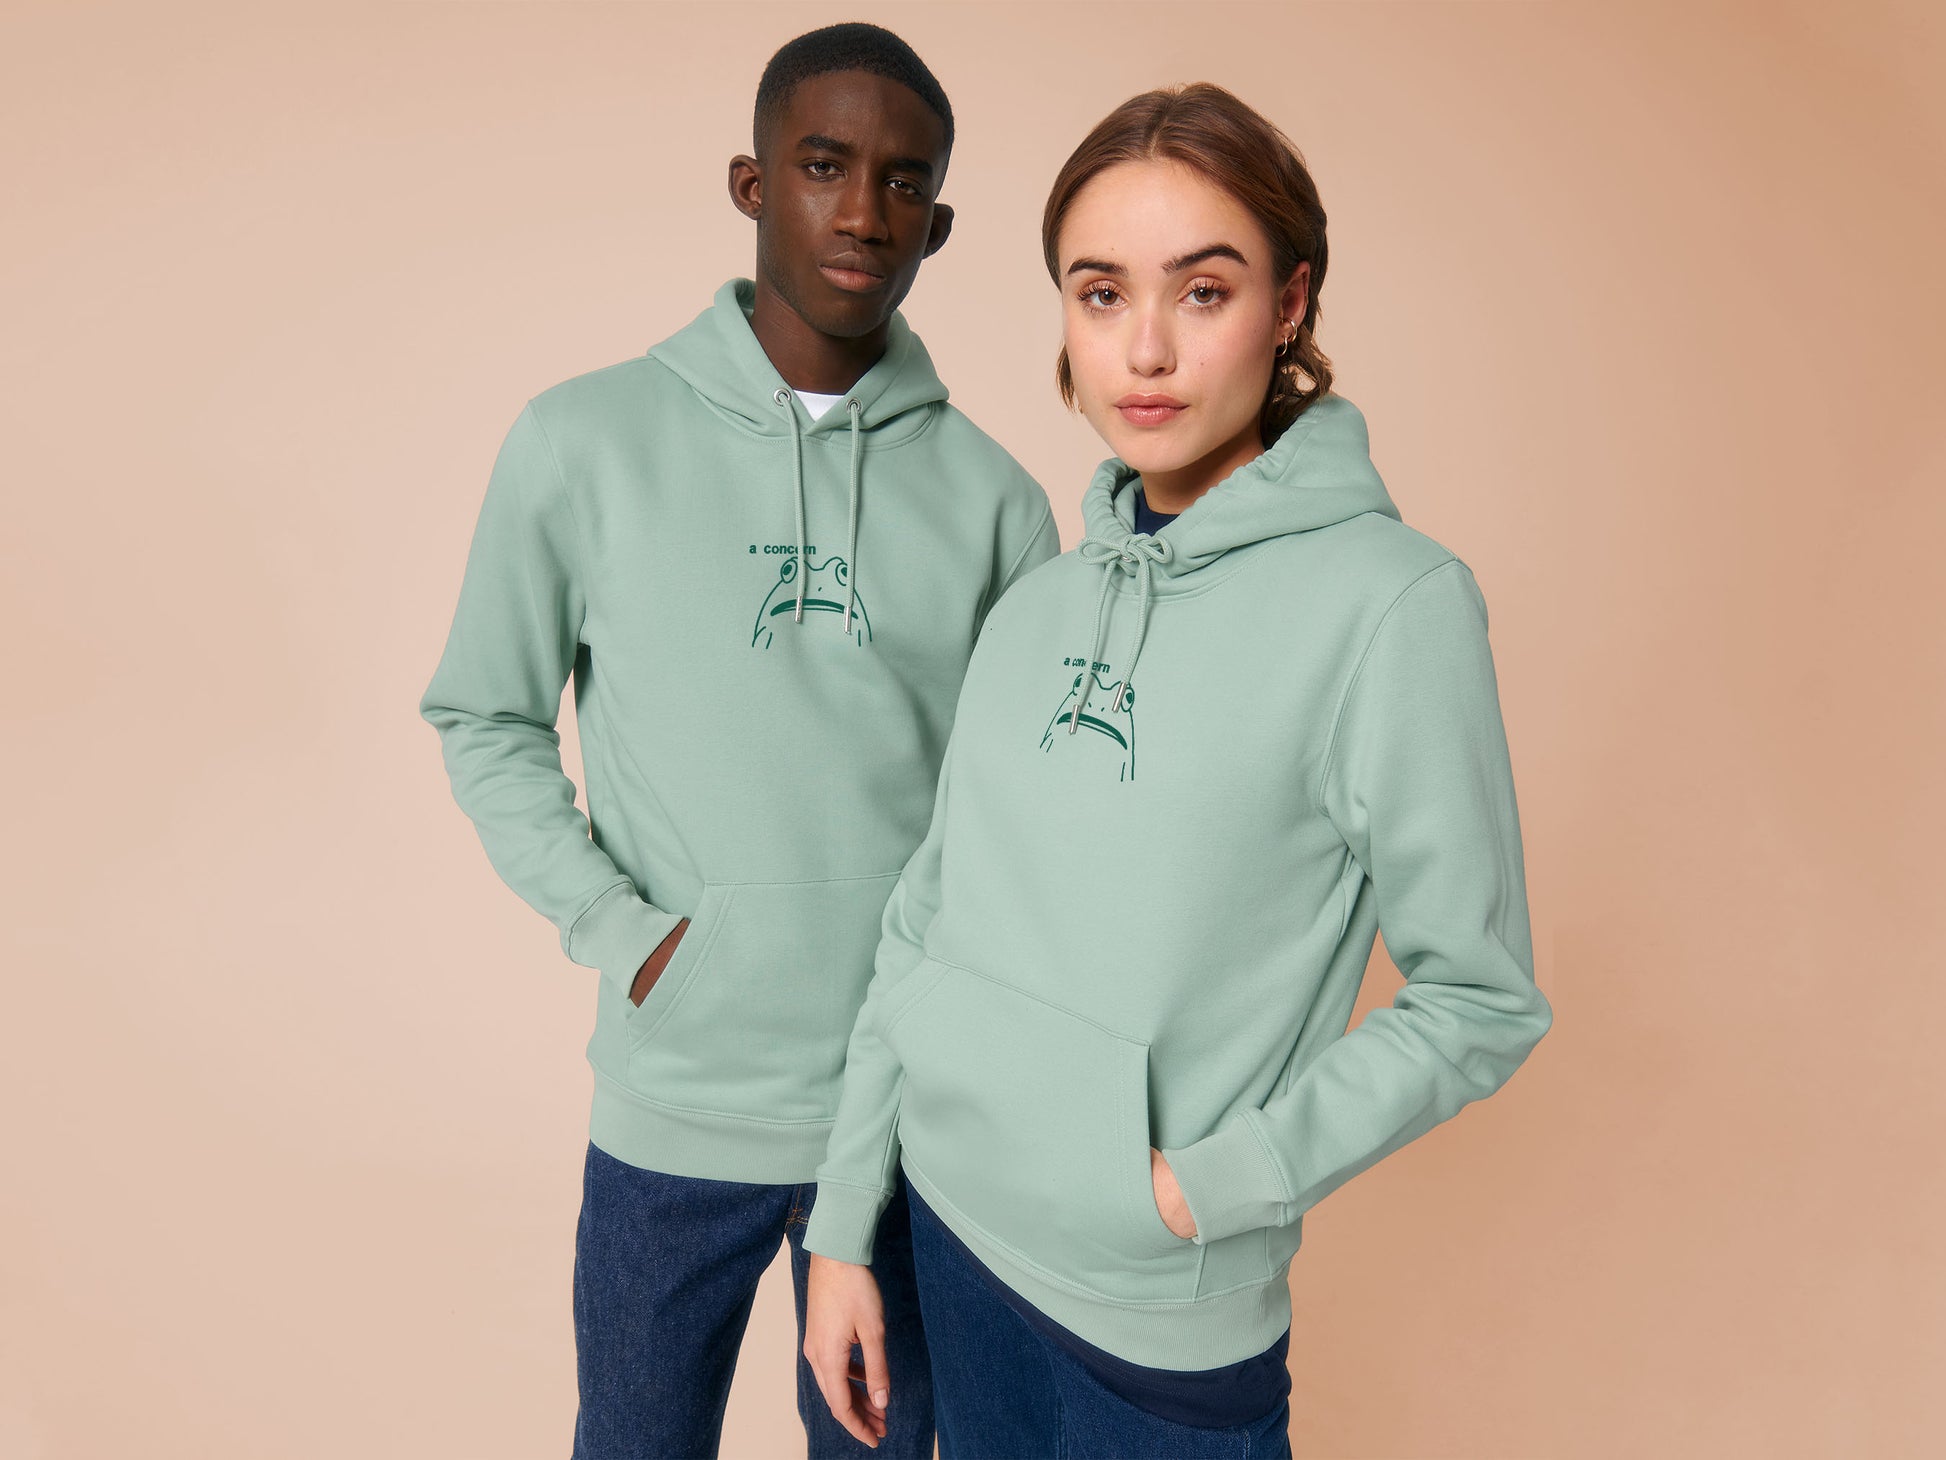 A woman and man both wearing an green long sleeve fleece hoodie, with an embroidered black thread design of cute confused looking frog with the text a concern.